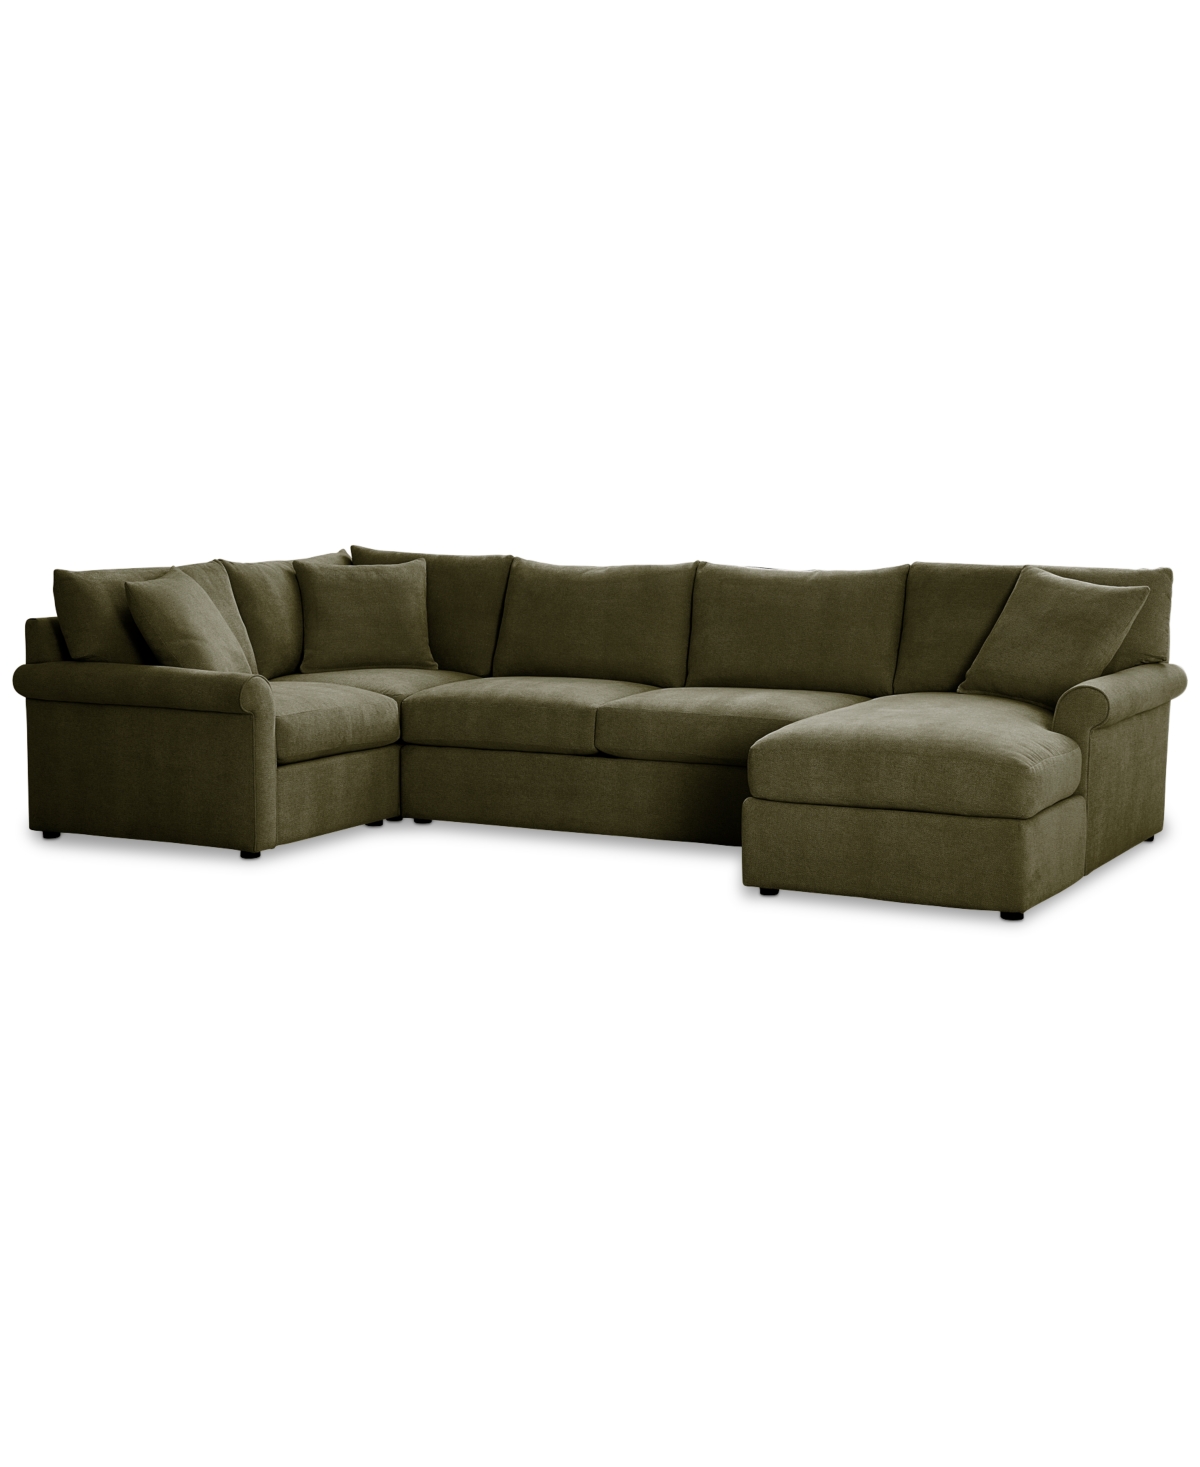 Furniture Wrenley 138" 4-pc. Fabric Modular Chaise Sectional Sofa, Created For Macy's In Olive